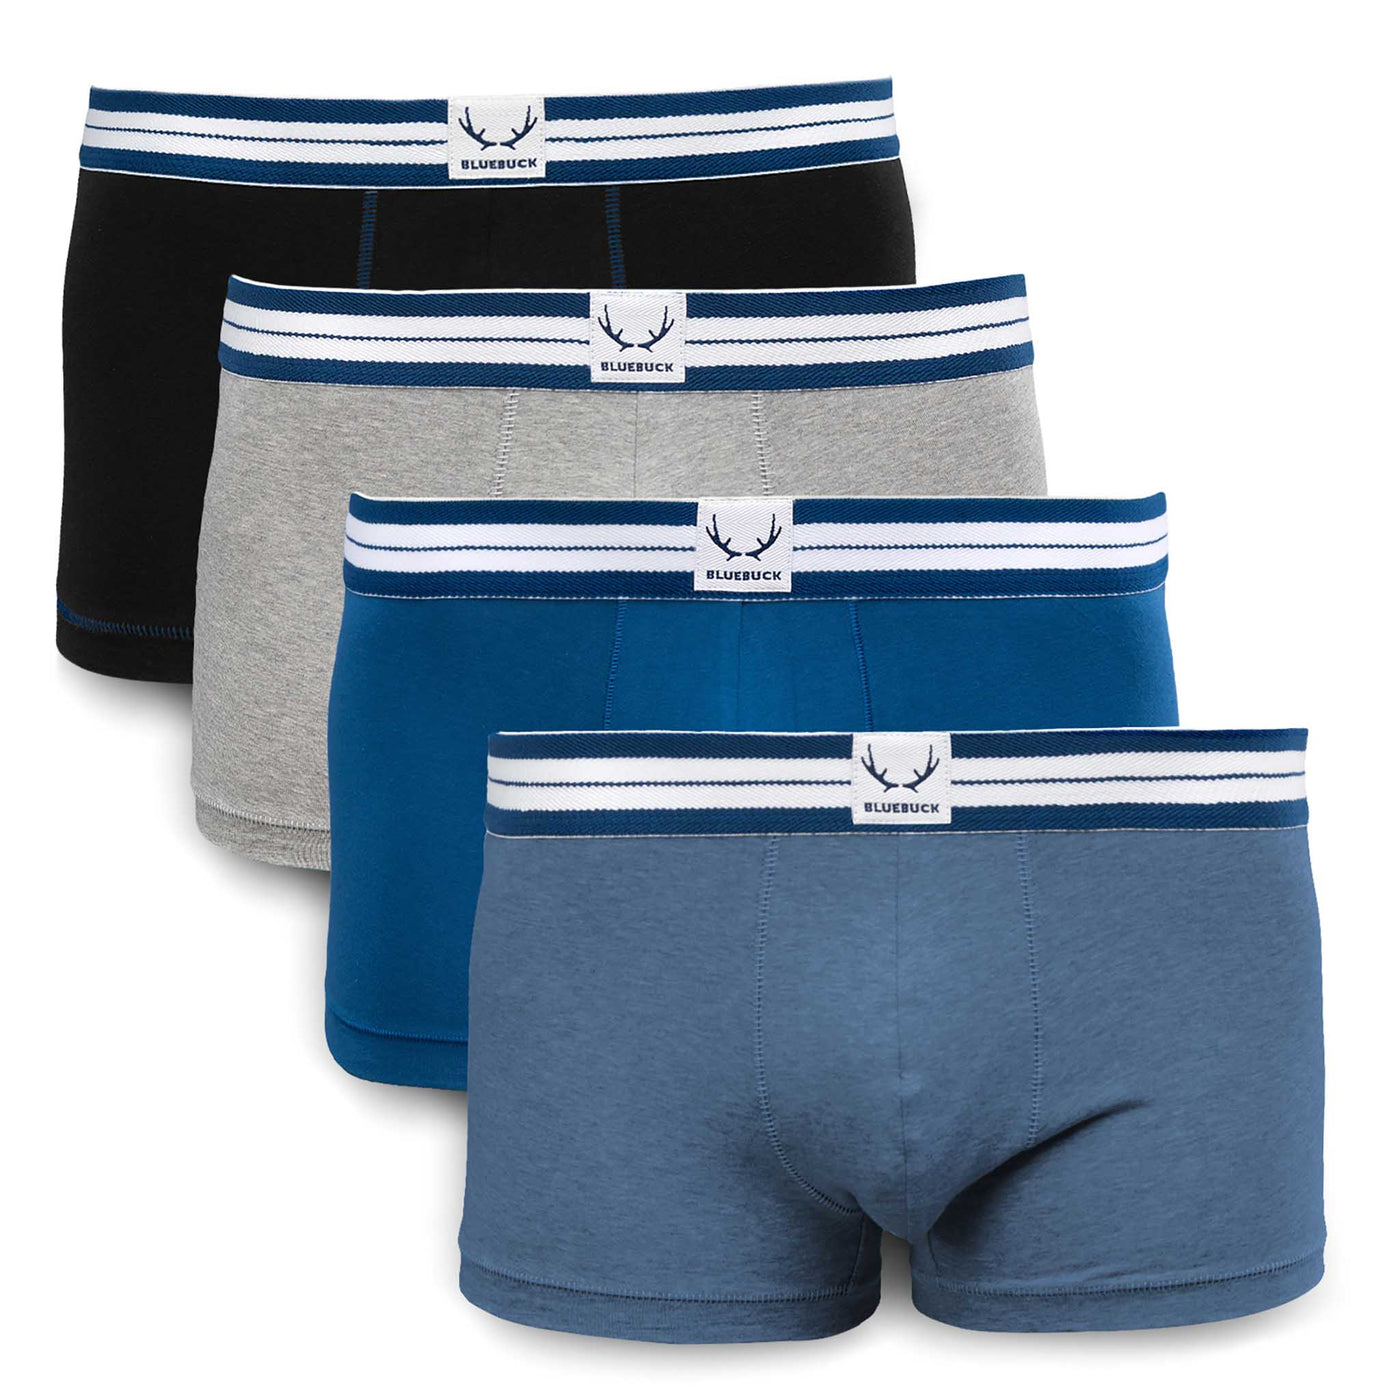 4 classic blue and grey organic cotton trunks